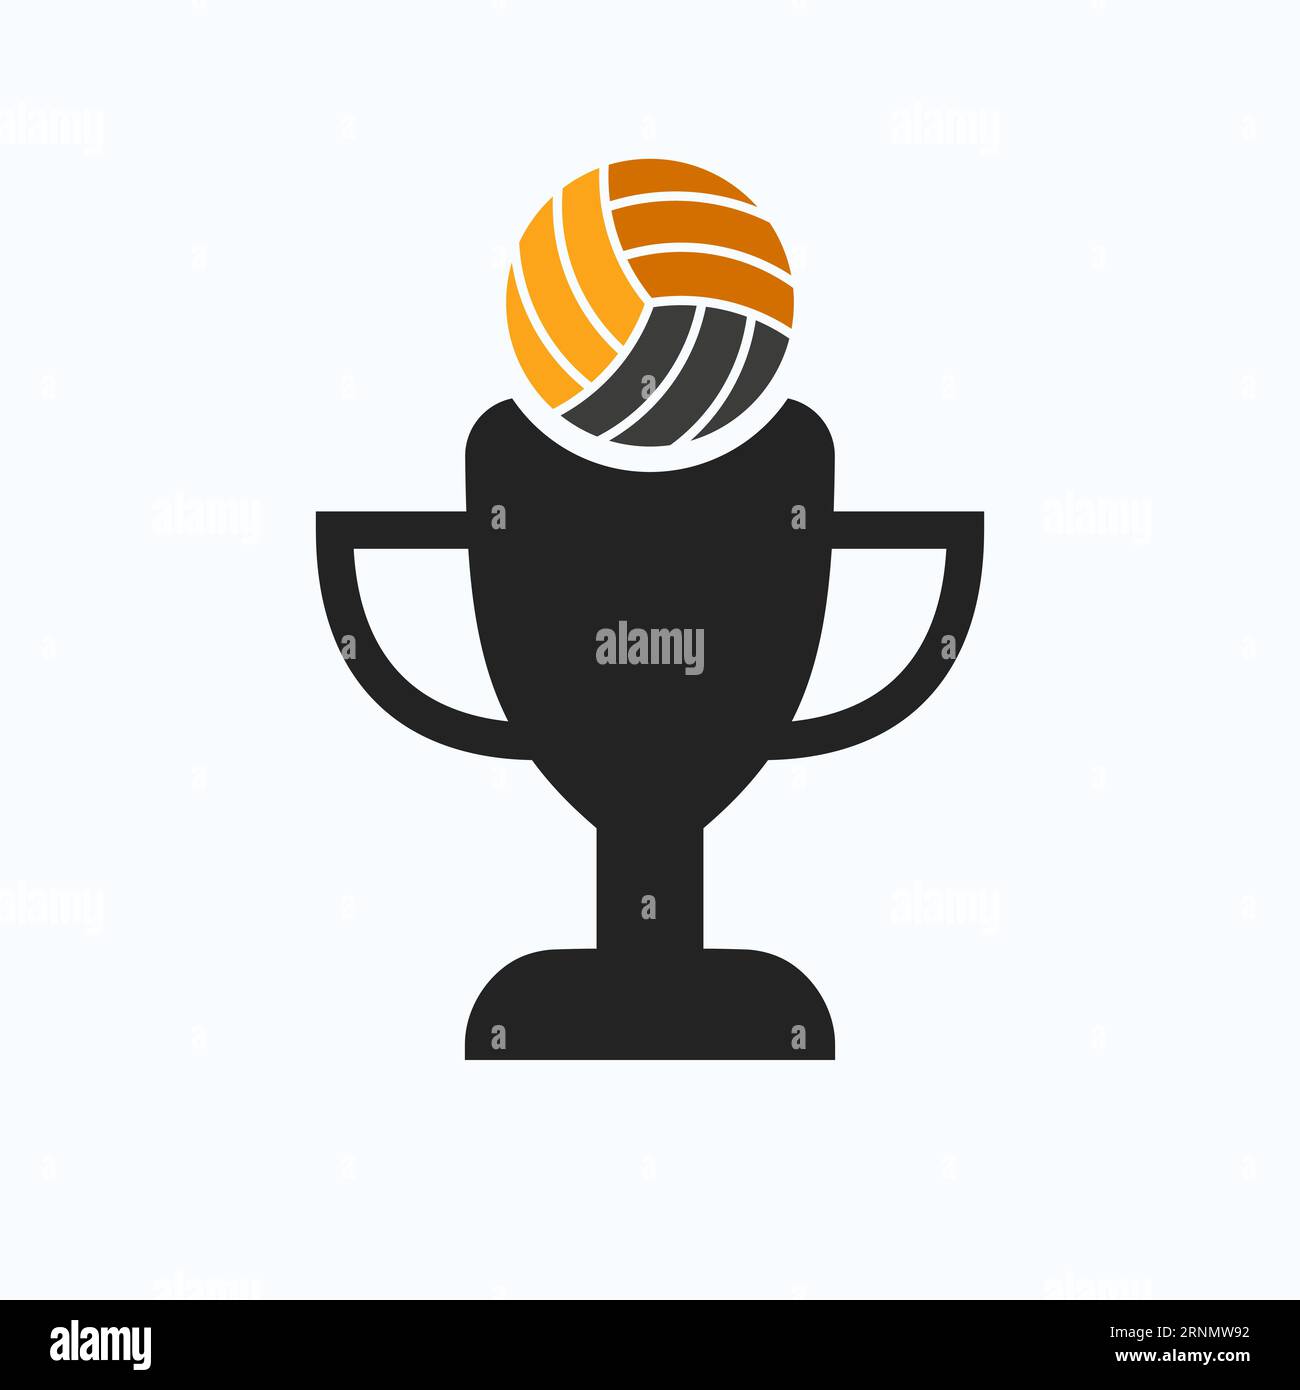 Volleyball Championship Trophy Logo Design Concept With Volleyball And Trophy Icon Stock Vector